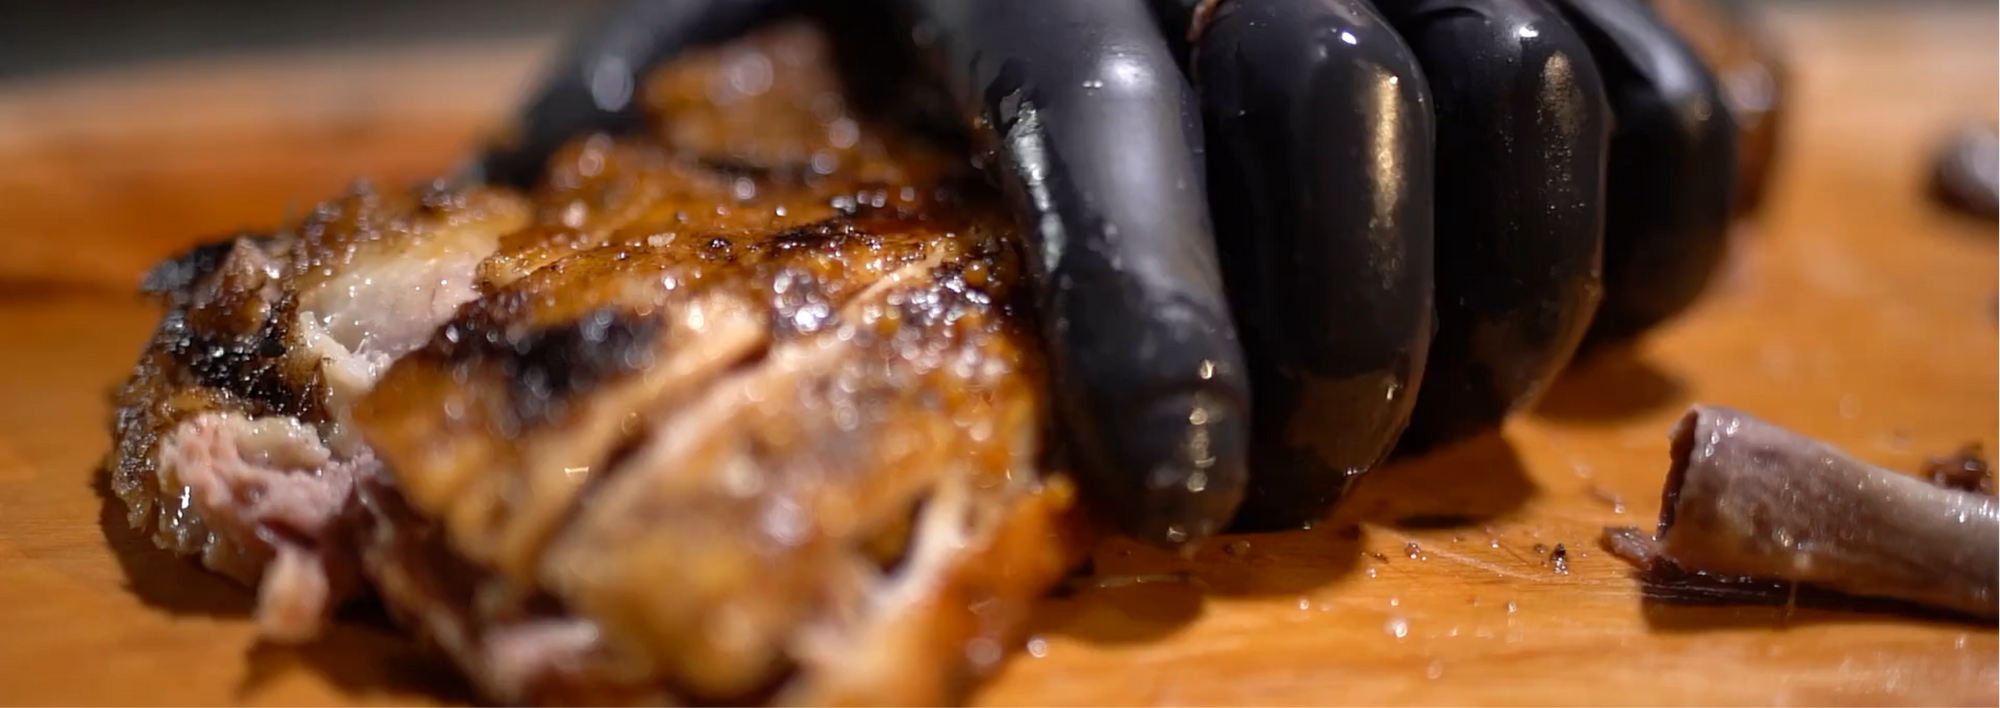 Black glove holding and slicing barbeque chicken